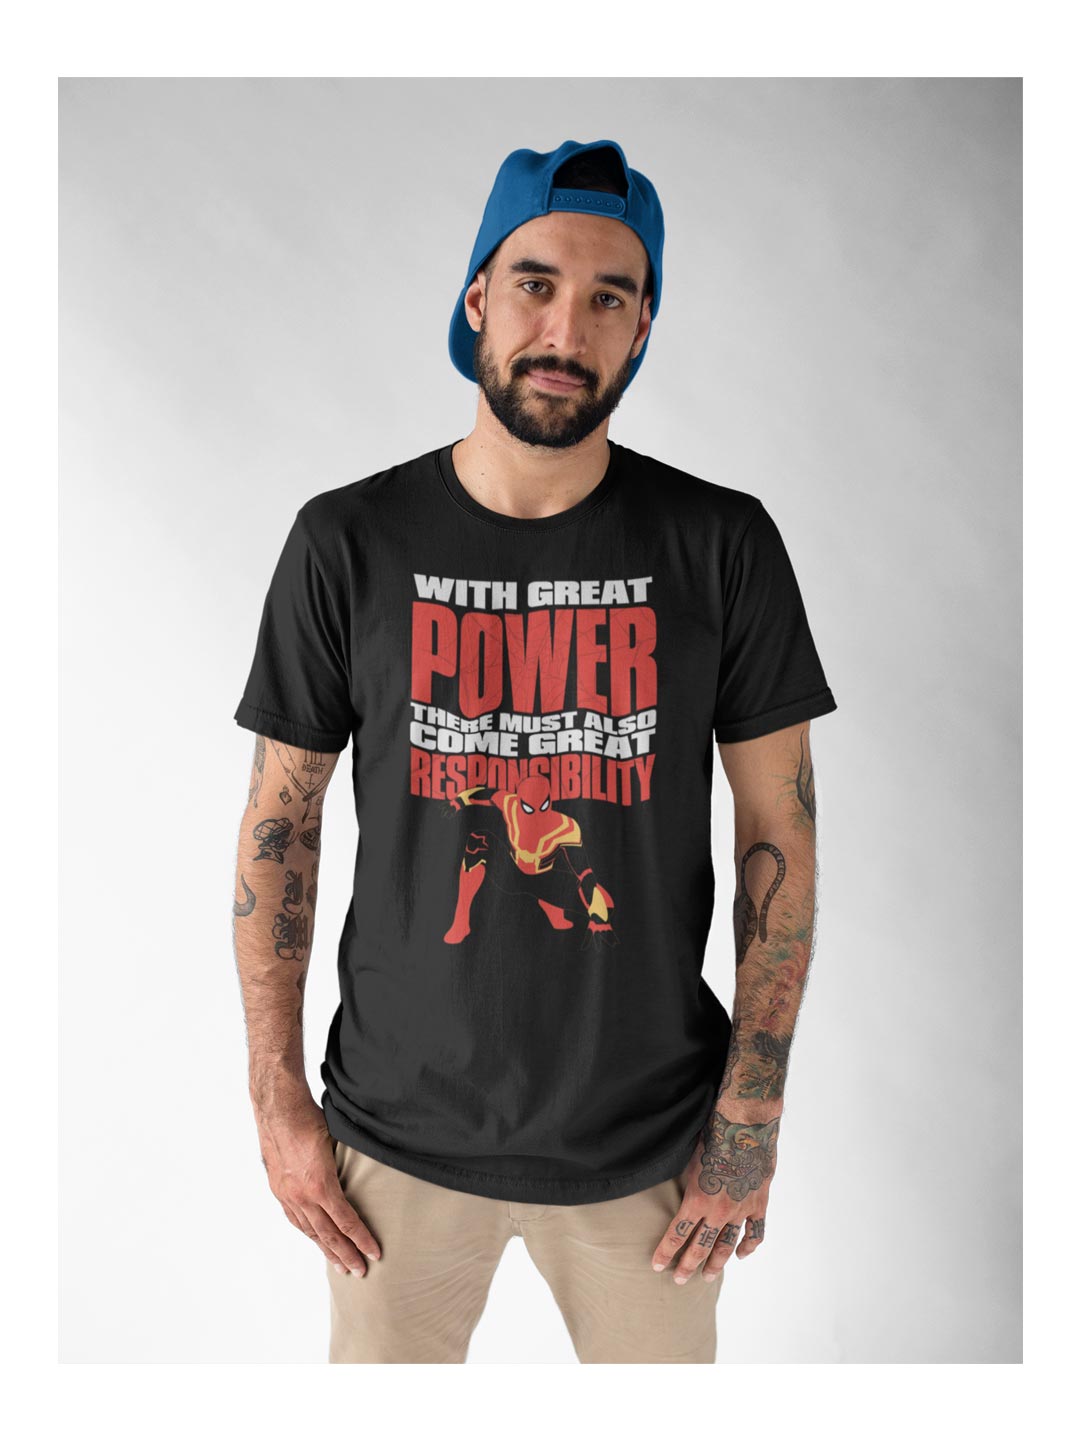 Great Power Comes Great Resposibility - Designer T-Shirts